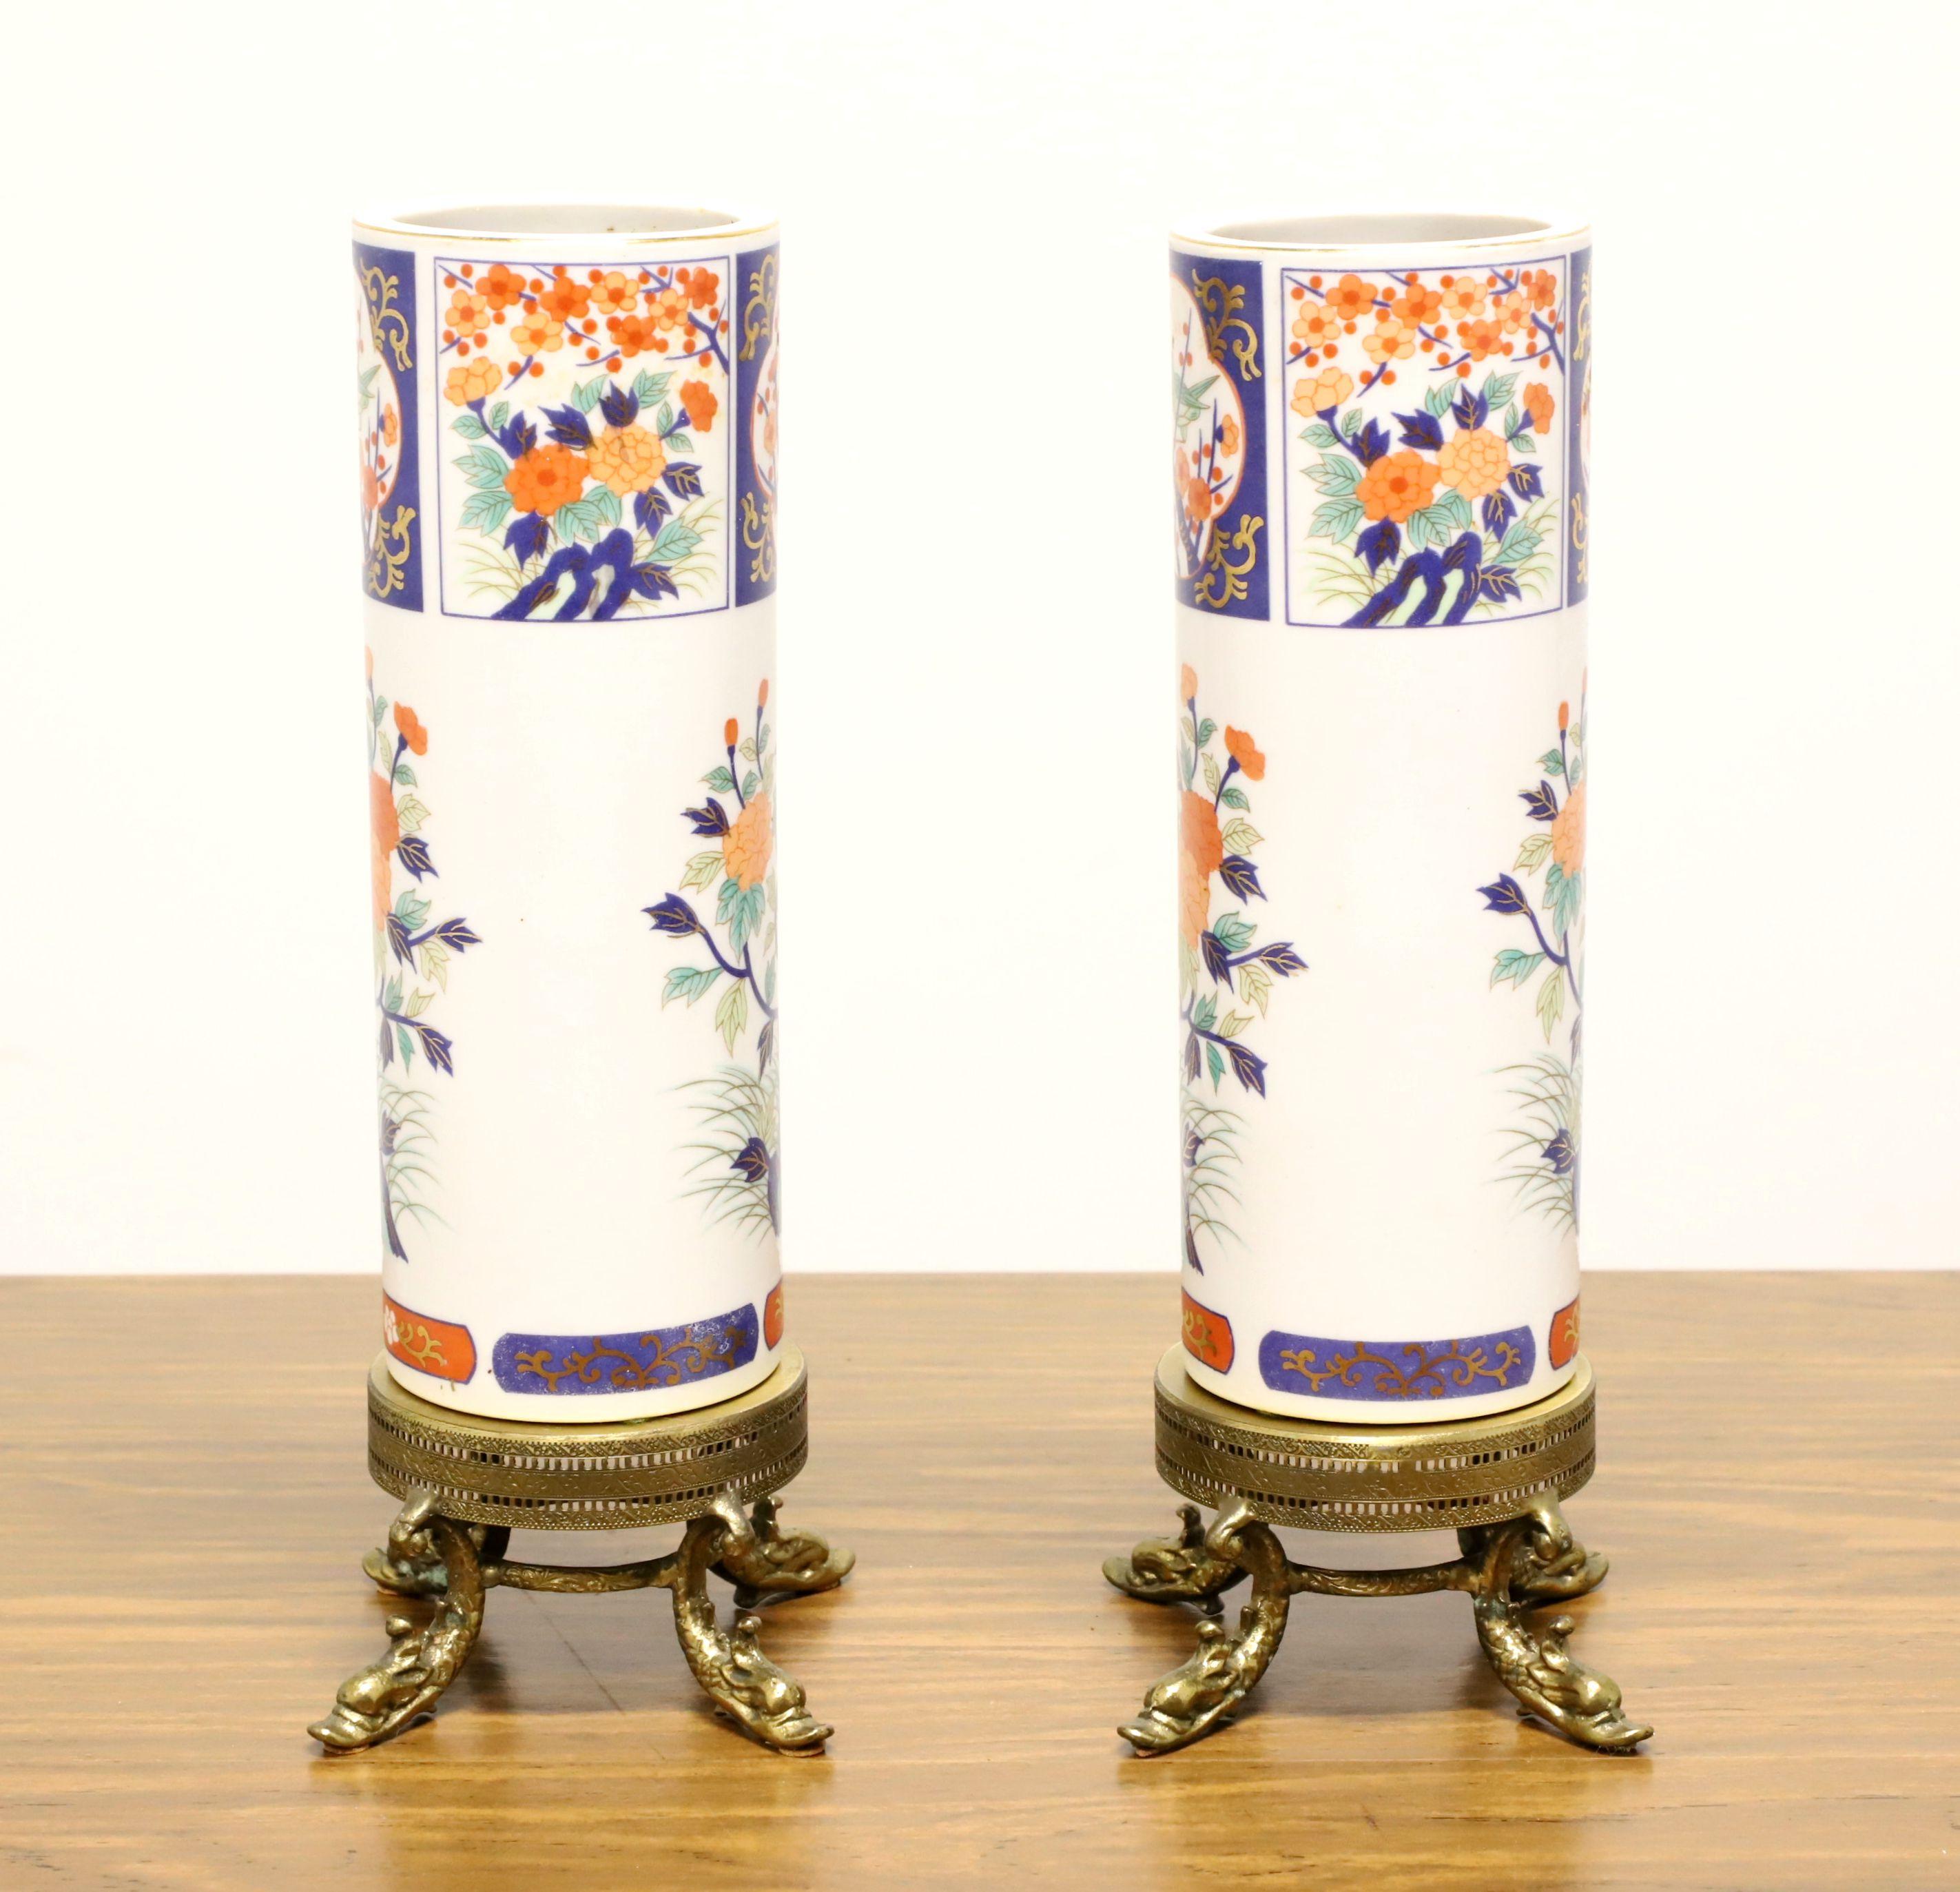 A pair of Asian inspired table vases on brass stands, unbranded. Hand painted porcelain with a Chinoiserie design of foliate & floral in shades of white, blue & salmon colors, and a cylindrical shape. Features the two porcelain vases on removable